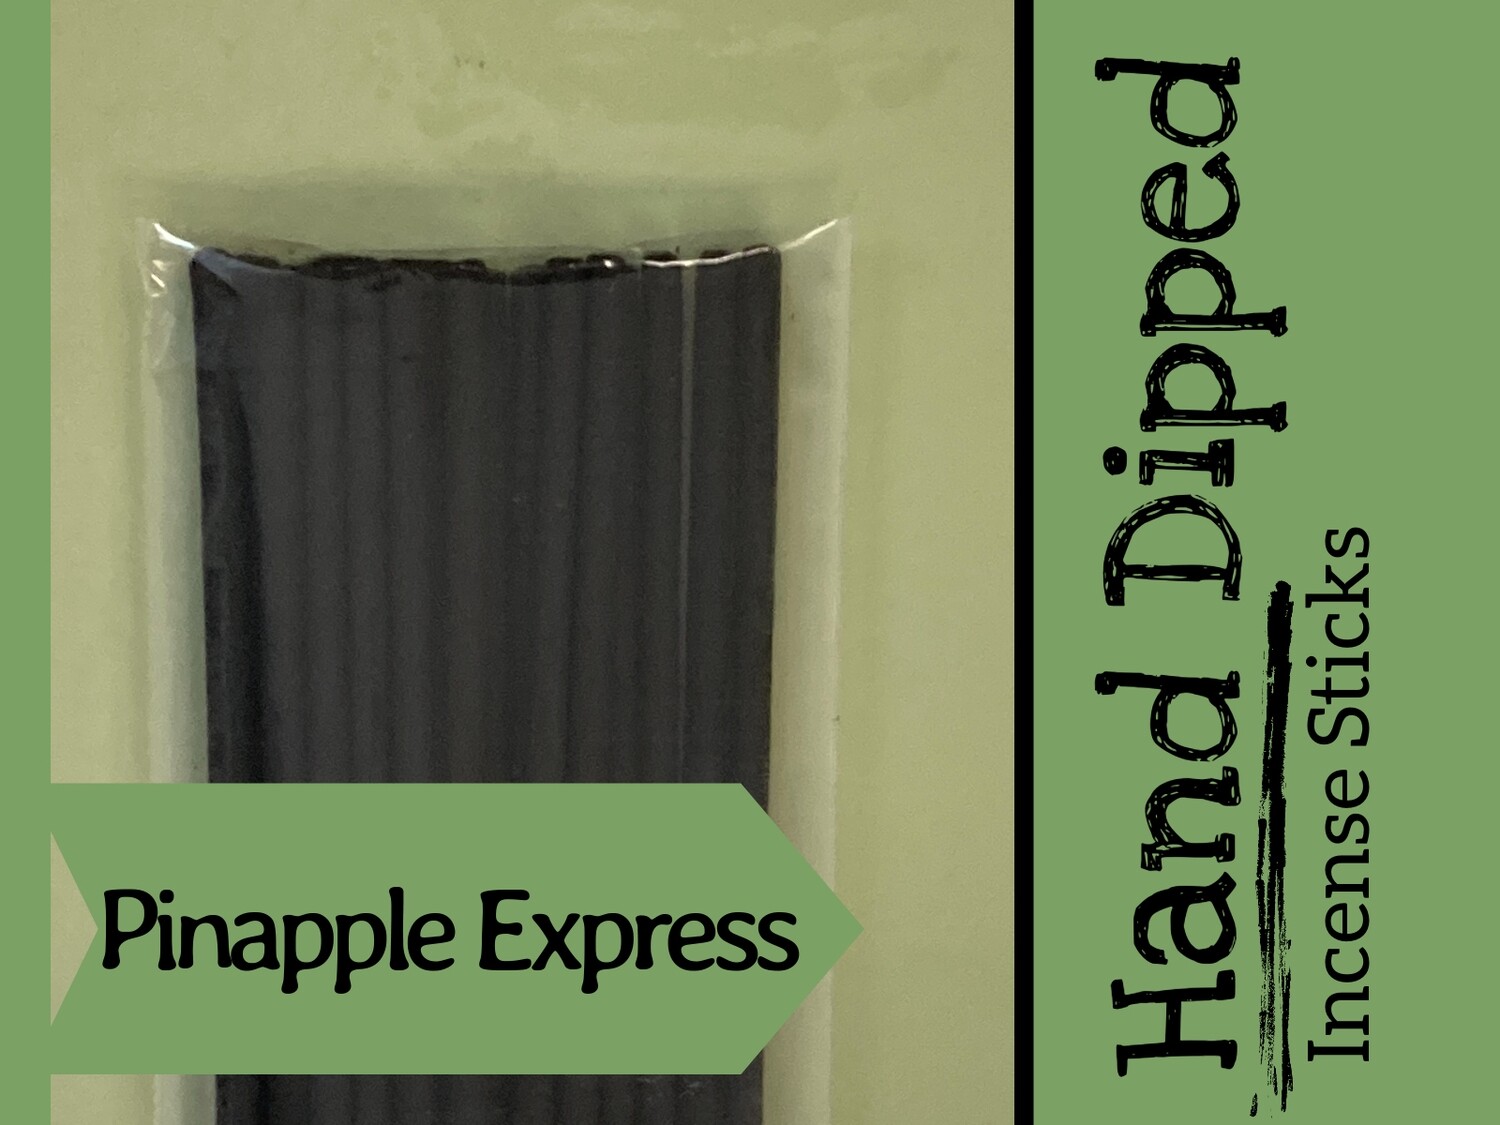 Pineapple Express - Hand dipped incense